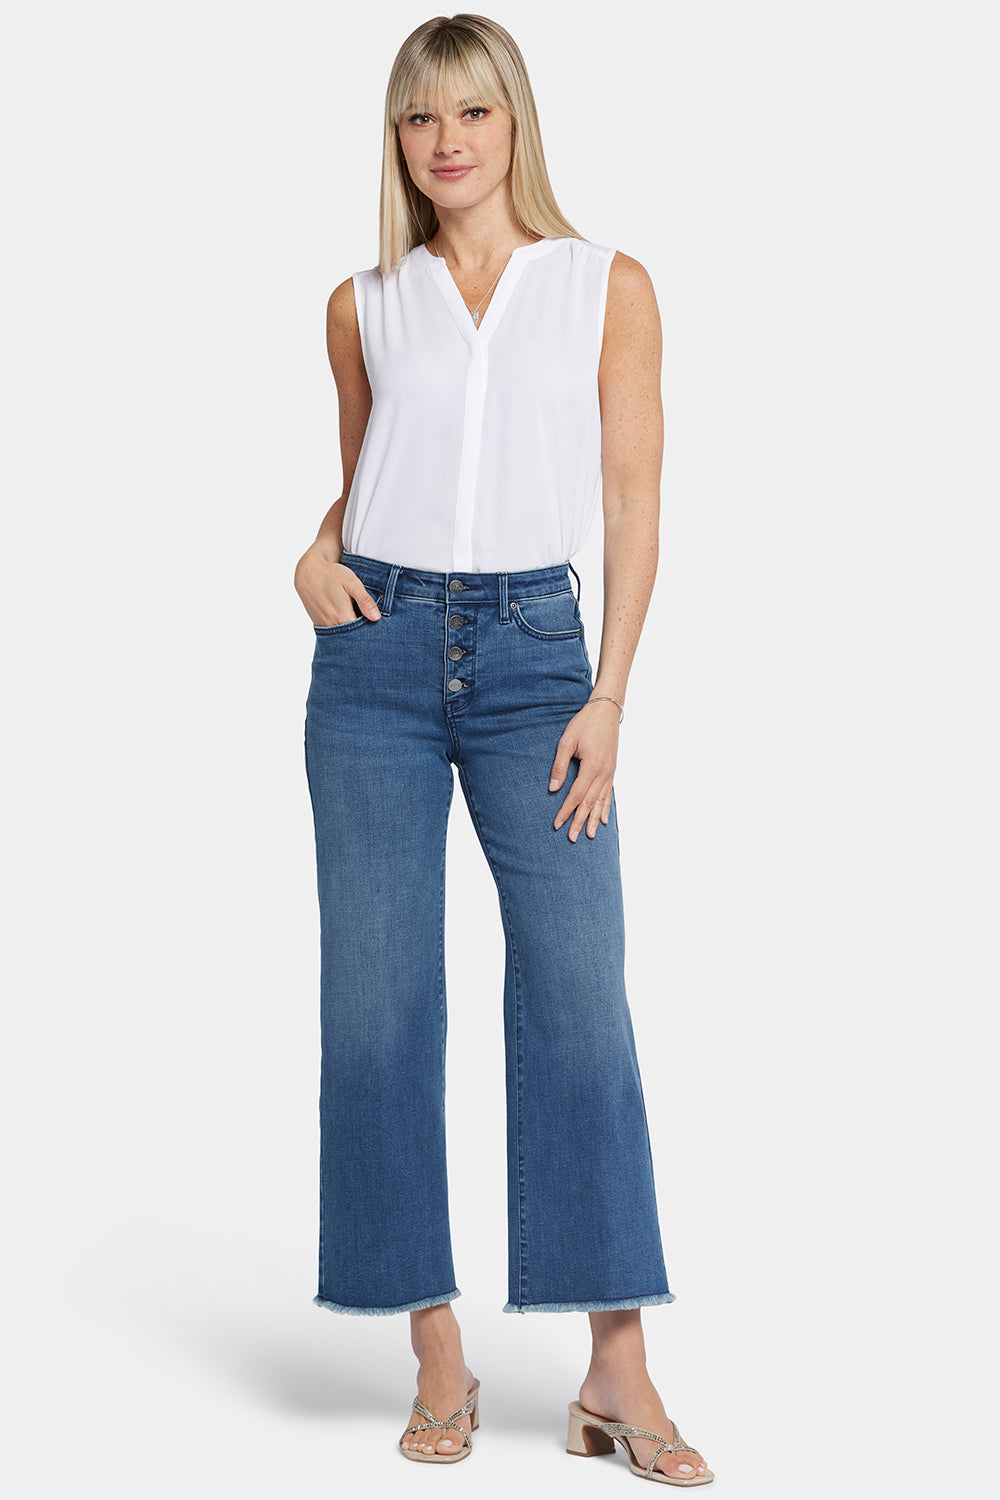 Teresa Wide Leg Ankle Jeans With High Rise And Frayed Hems - Mission Blue  Blue | NYDJ